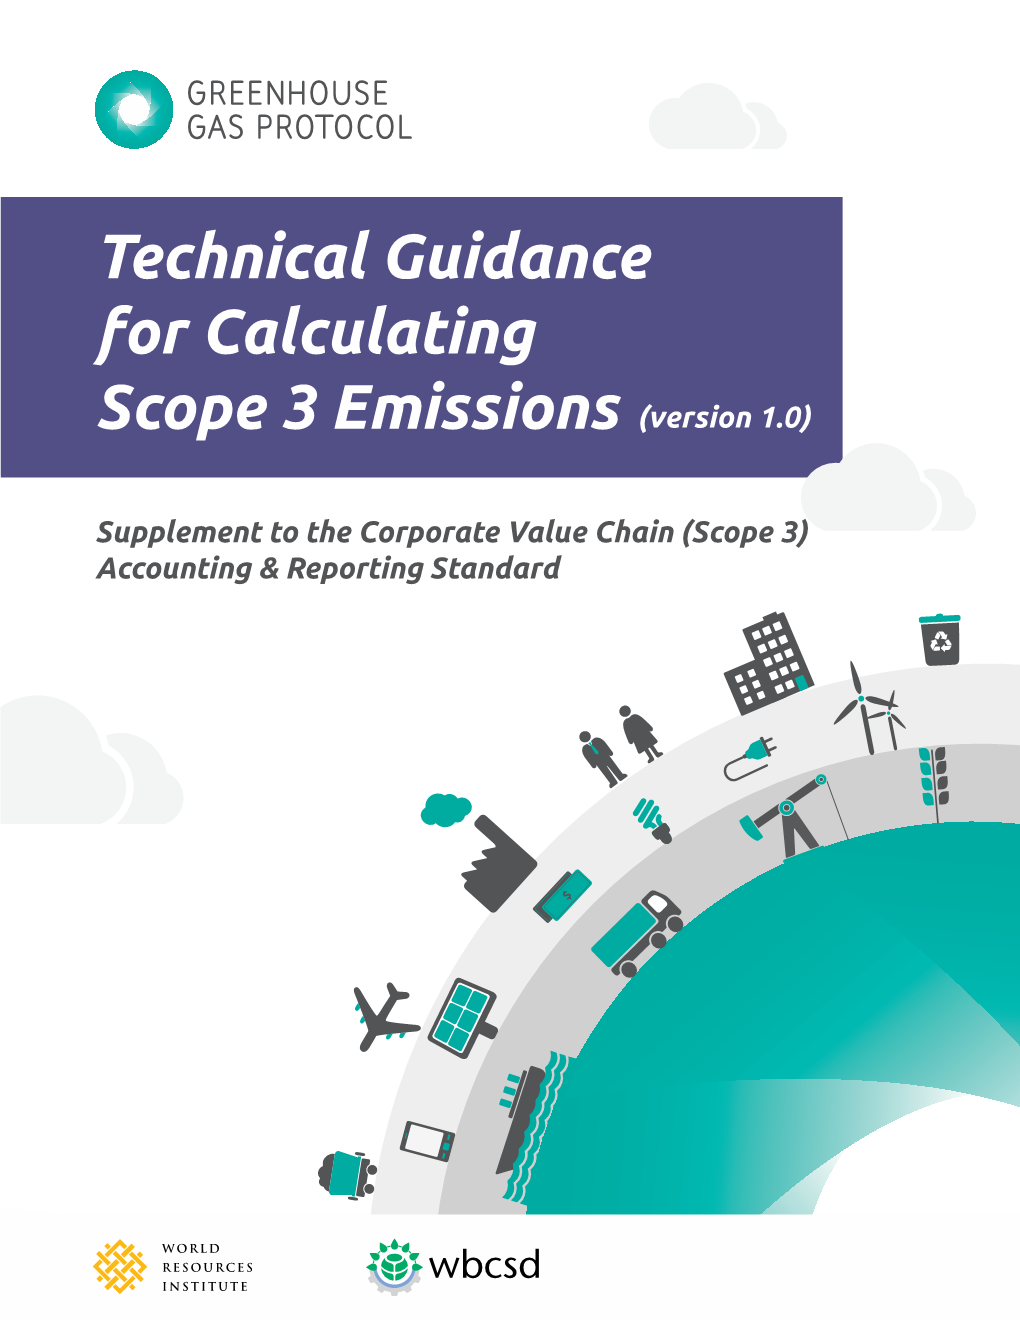 GHG Protocol Technical Guidance for Calculating Scope 3 Emissions